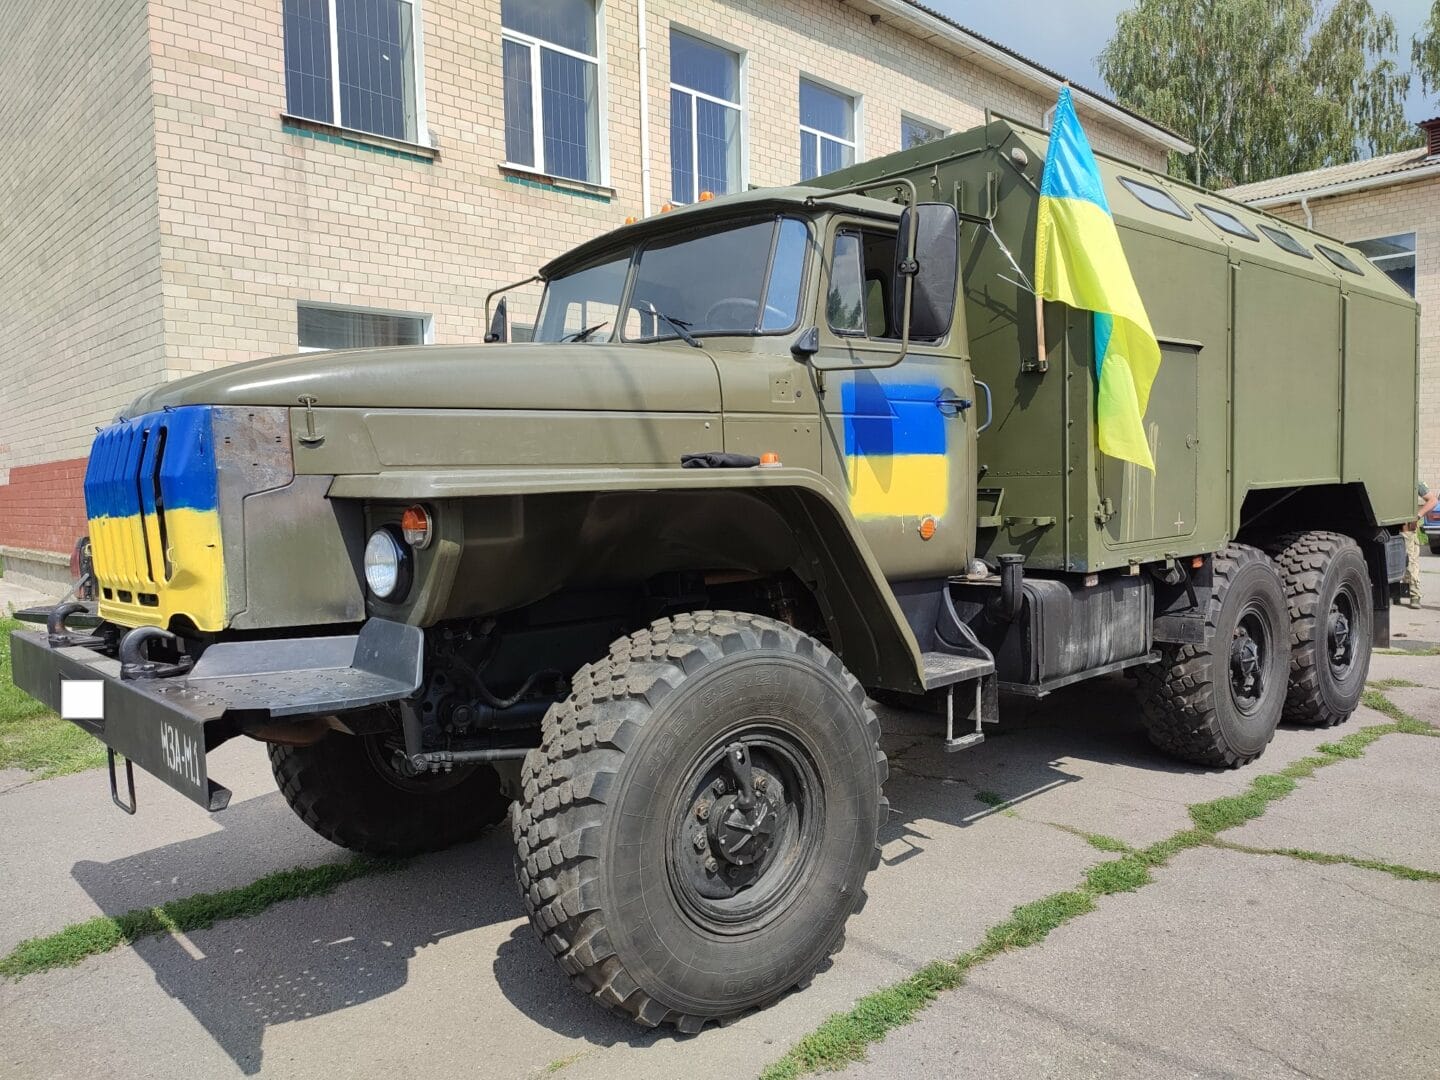 The truck of the invaders, which accompanied the russian troops in the territory of Ukraine, was repaired in the Community and handed over to the Ukrainian military 